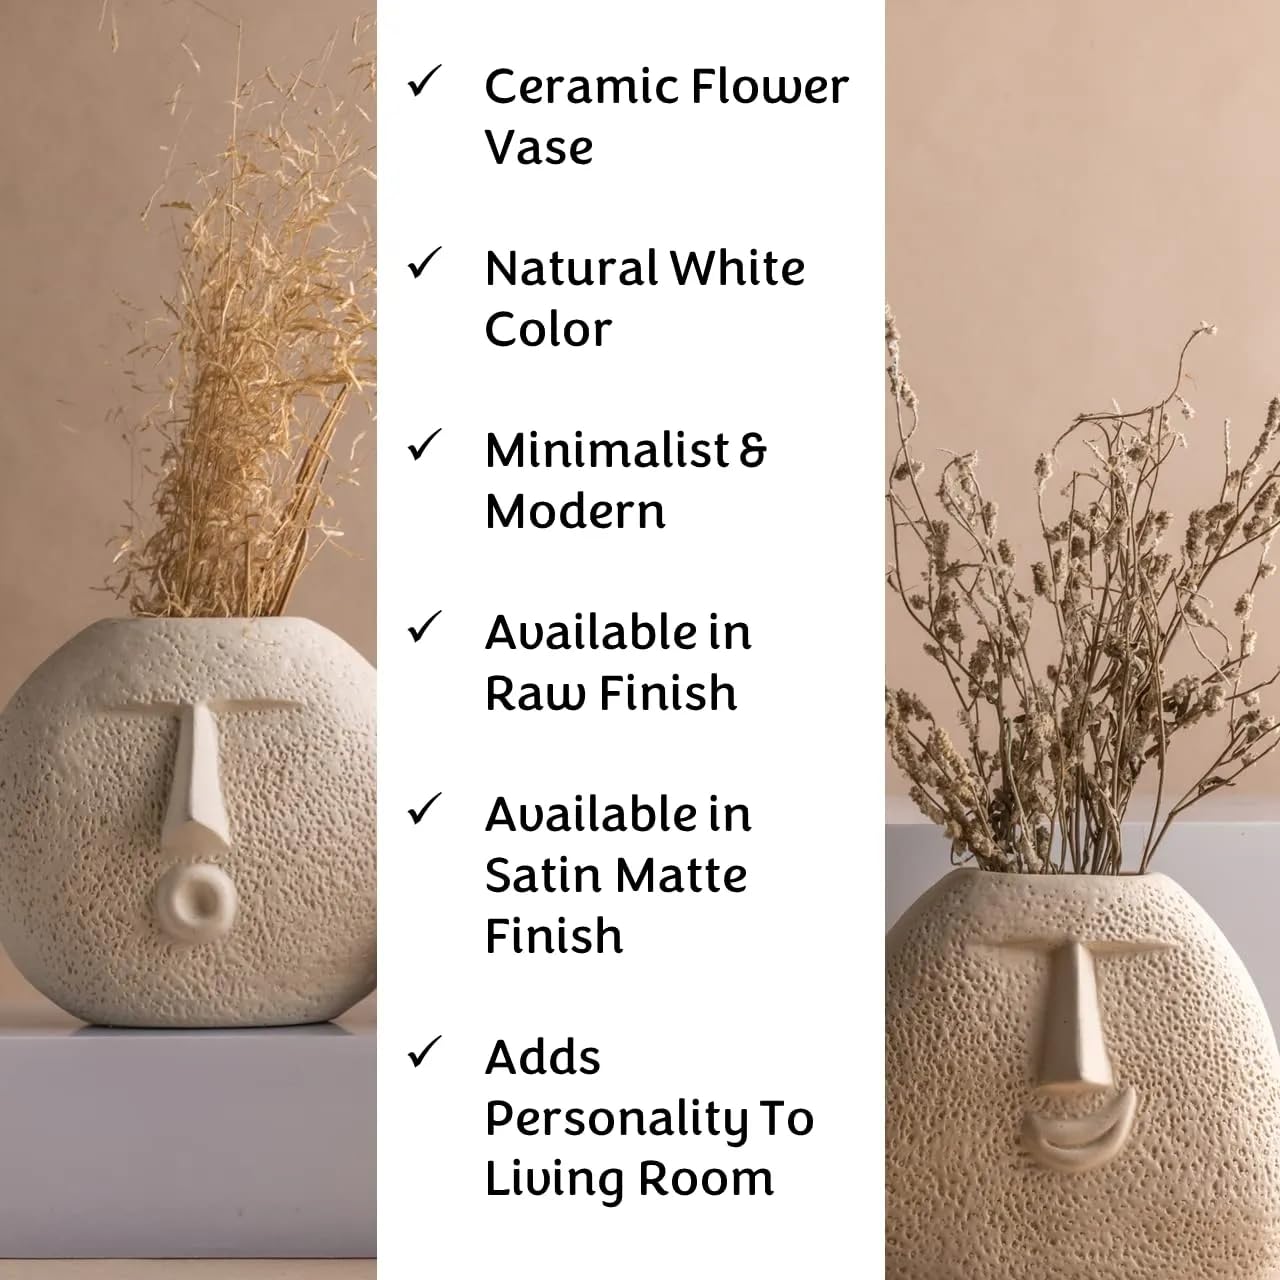  Decorative ceramic vase with a happy face, sure to brighten up your living space with its charming design.